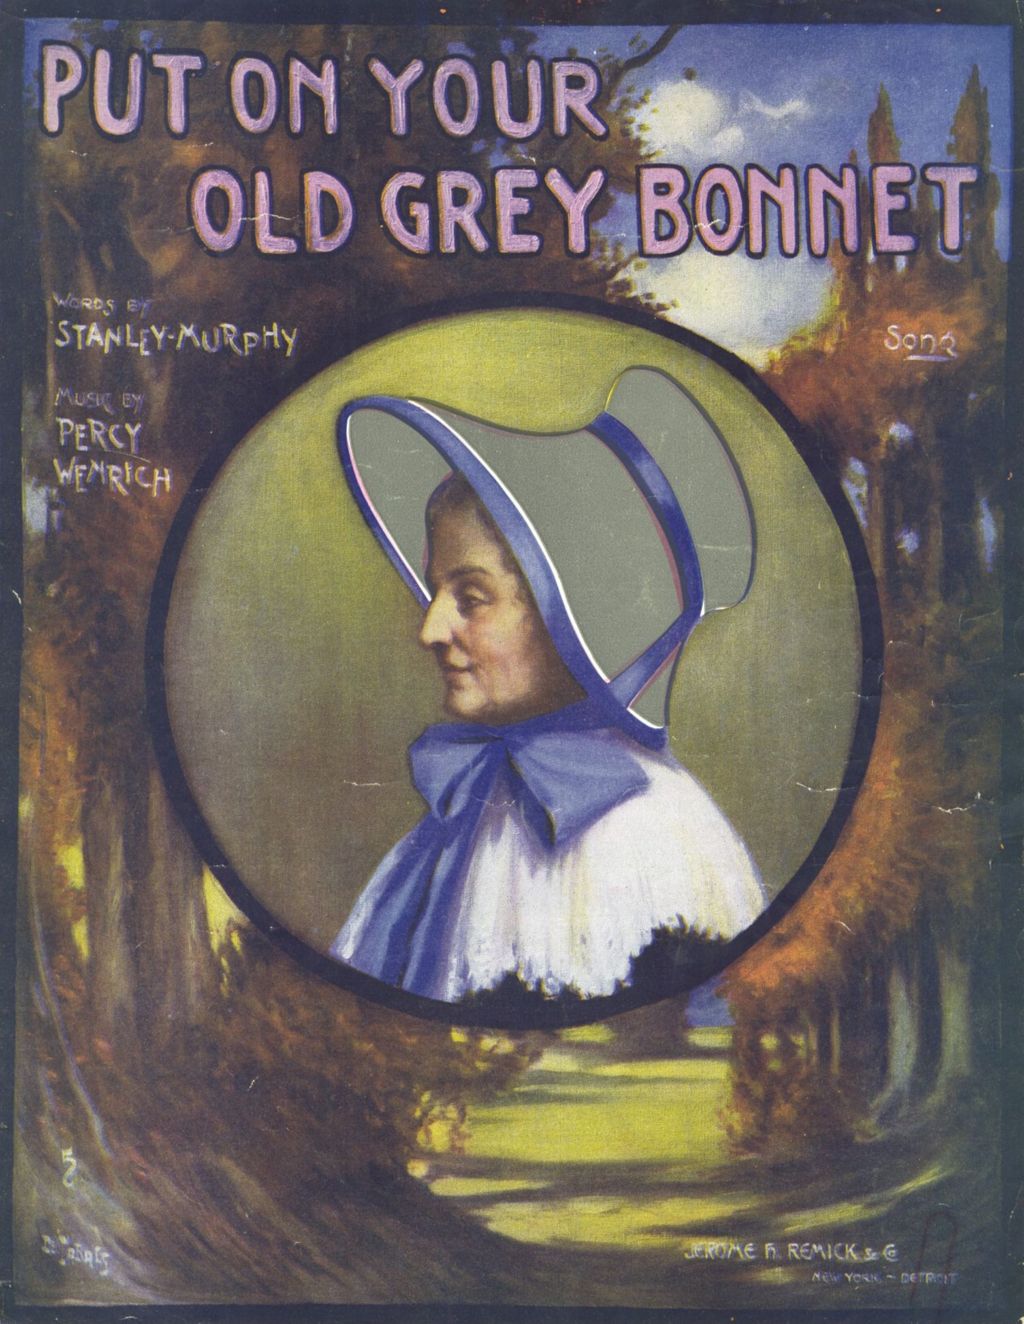 Miniature of Put On Your Old Grey Bonnet